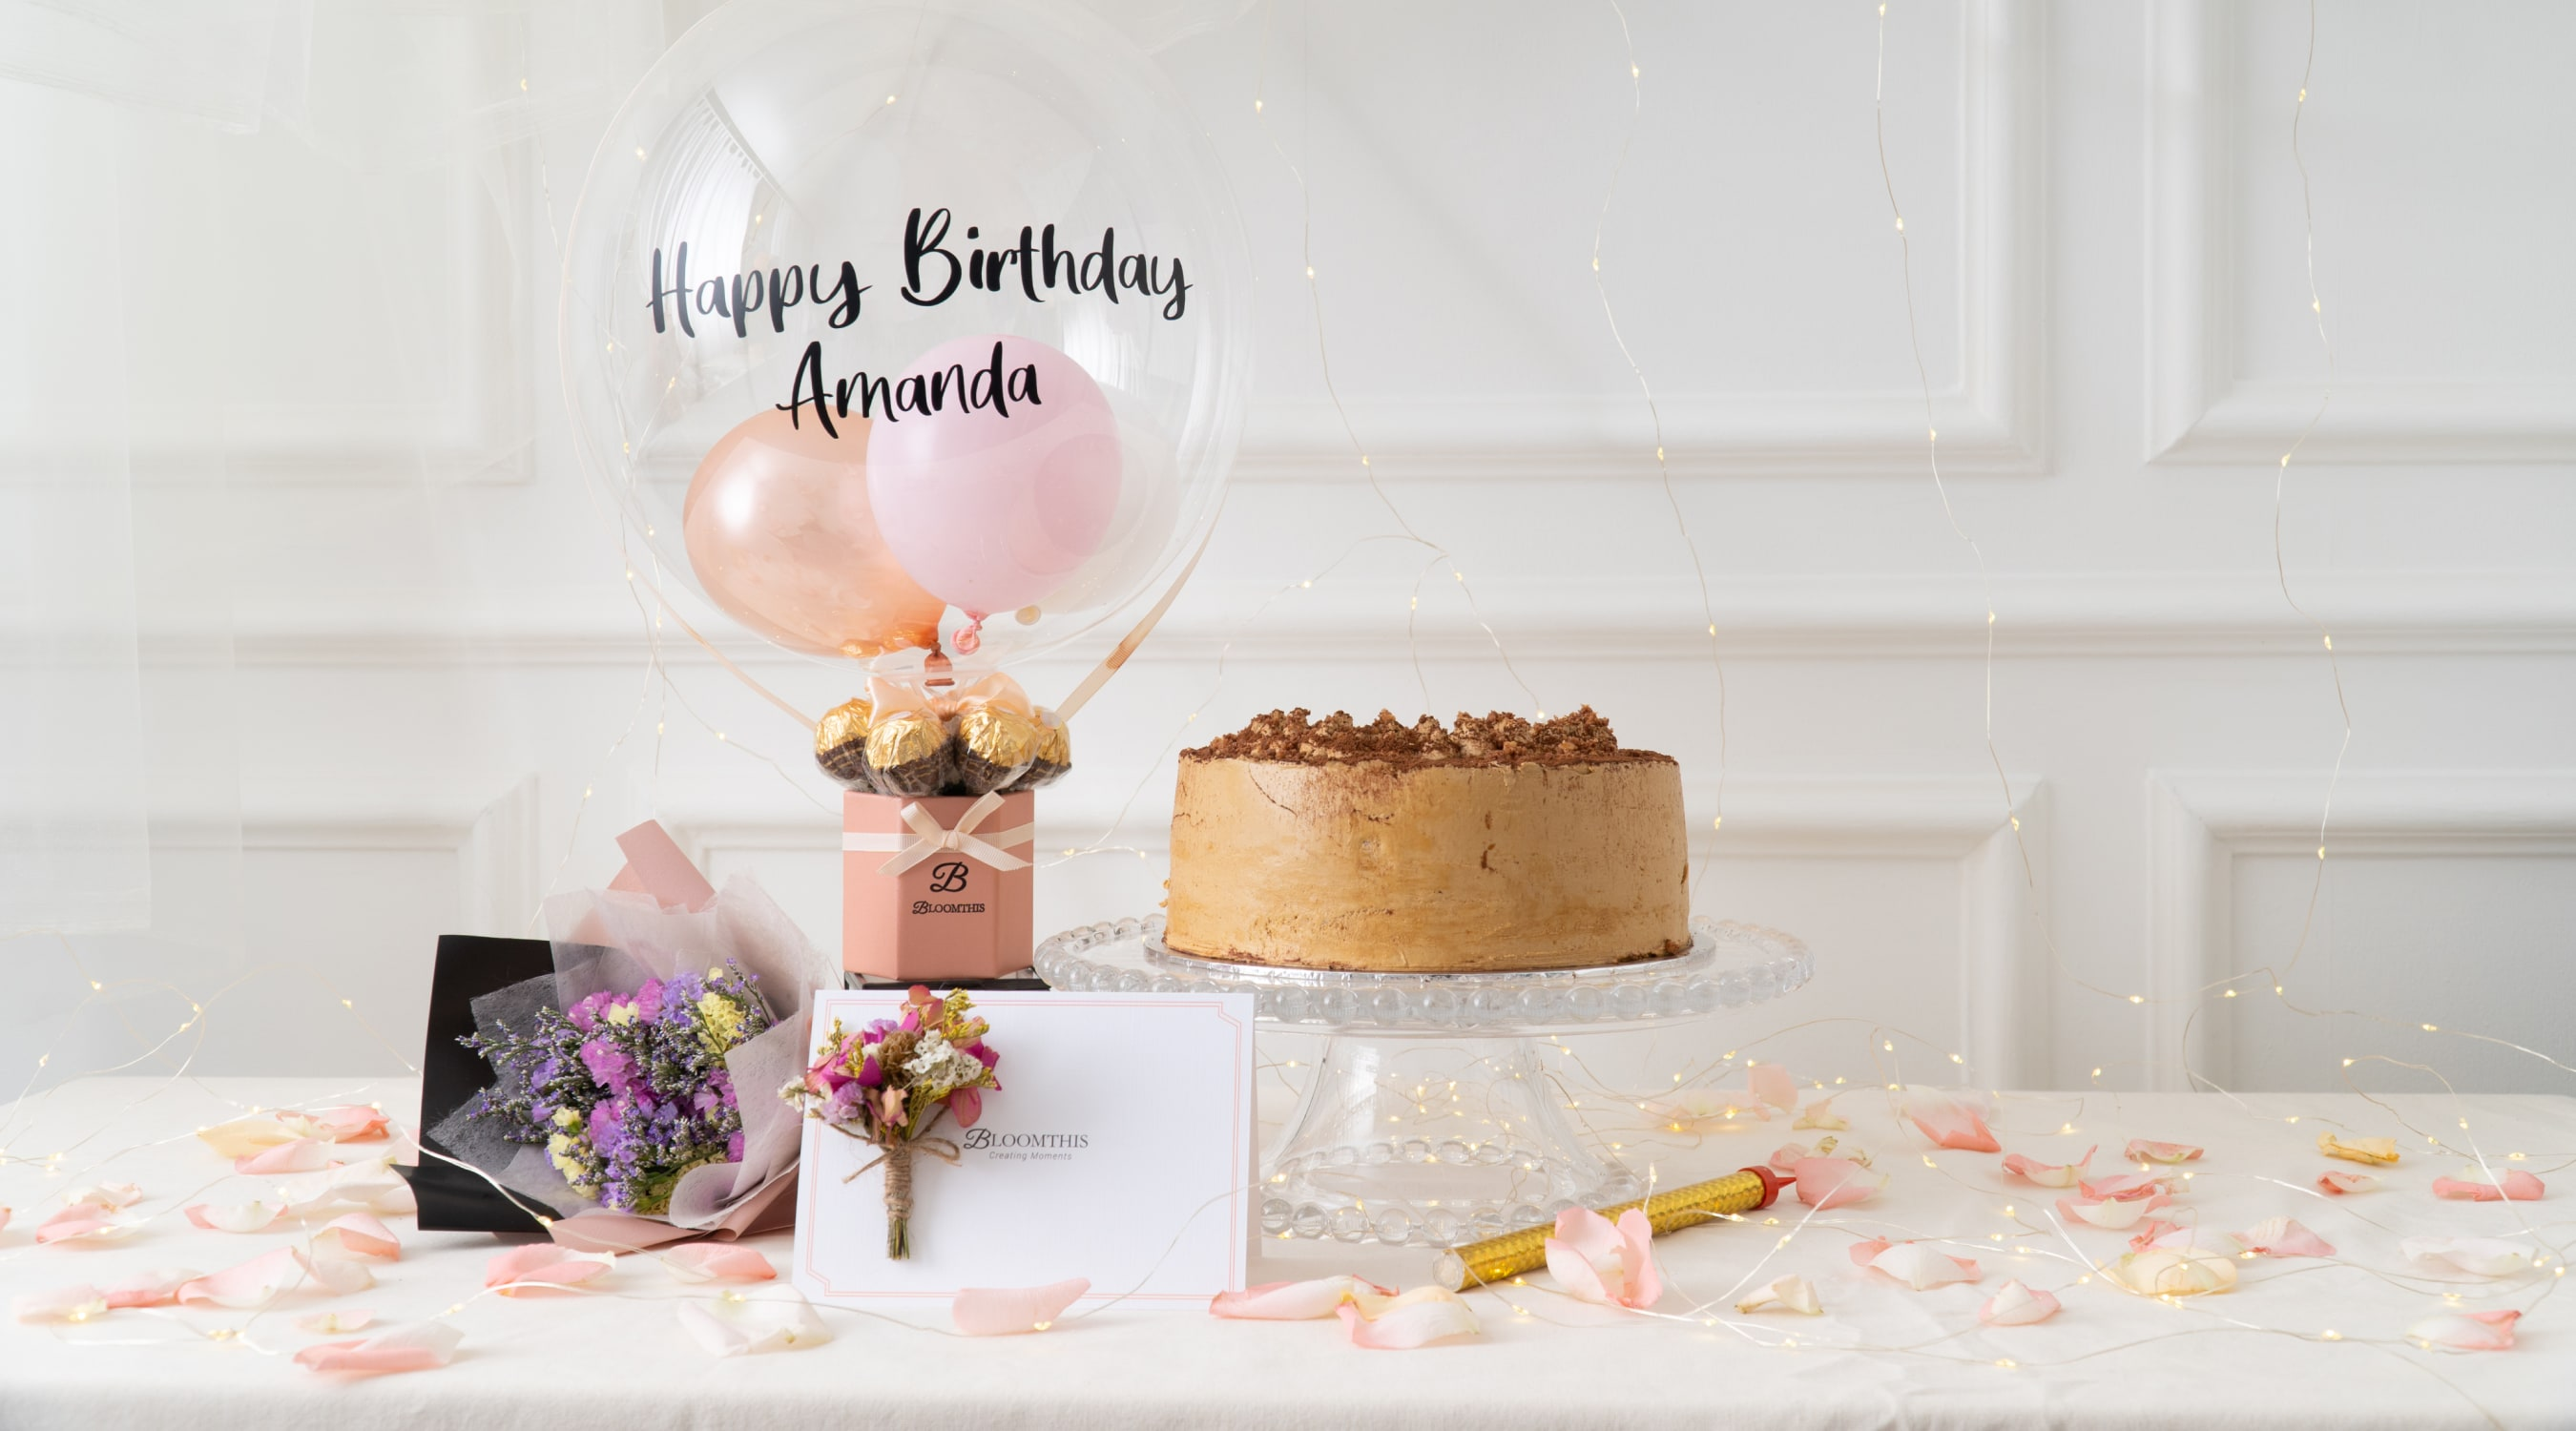 bloomthis-birthday-flowers-cakes-gifts